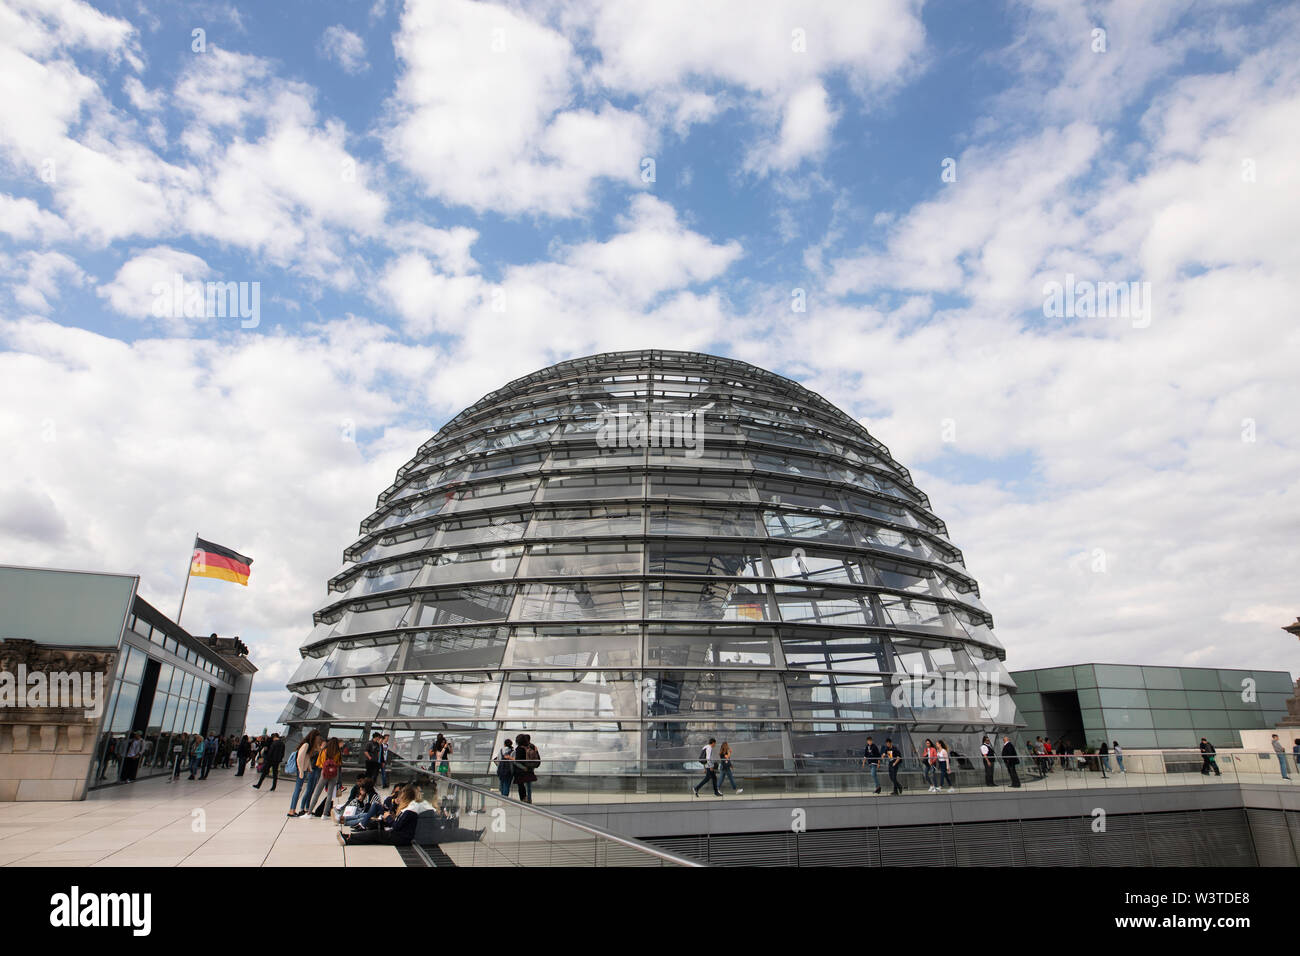 The glass dome on the roof of the Reichstag (parliament) building in Berlin, Germany. Stock Photo